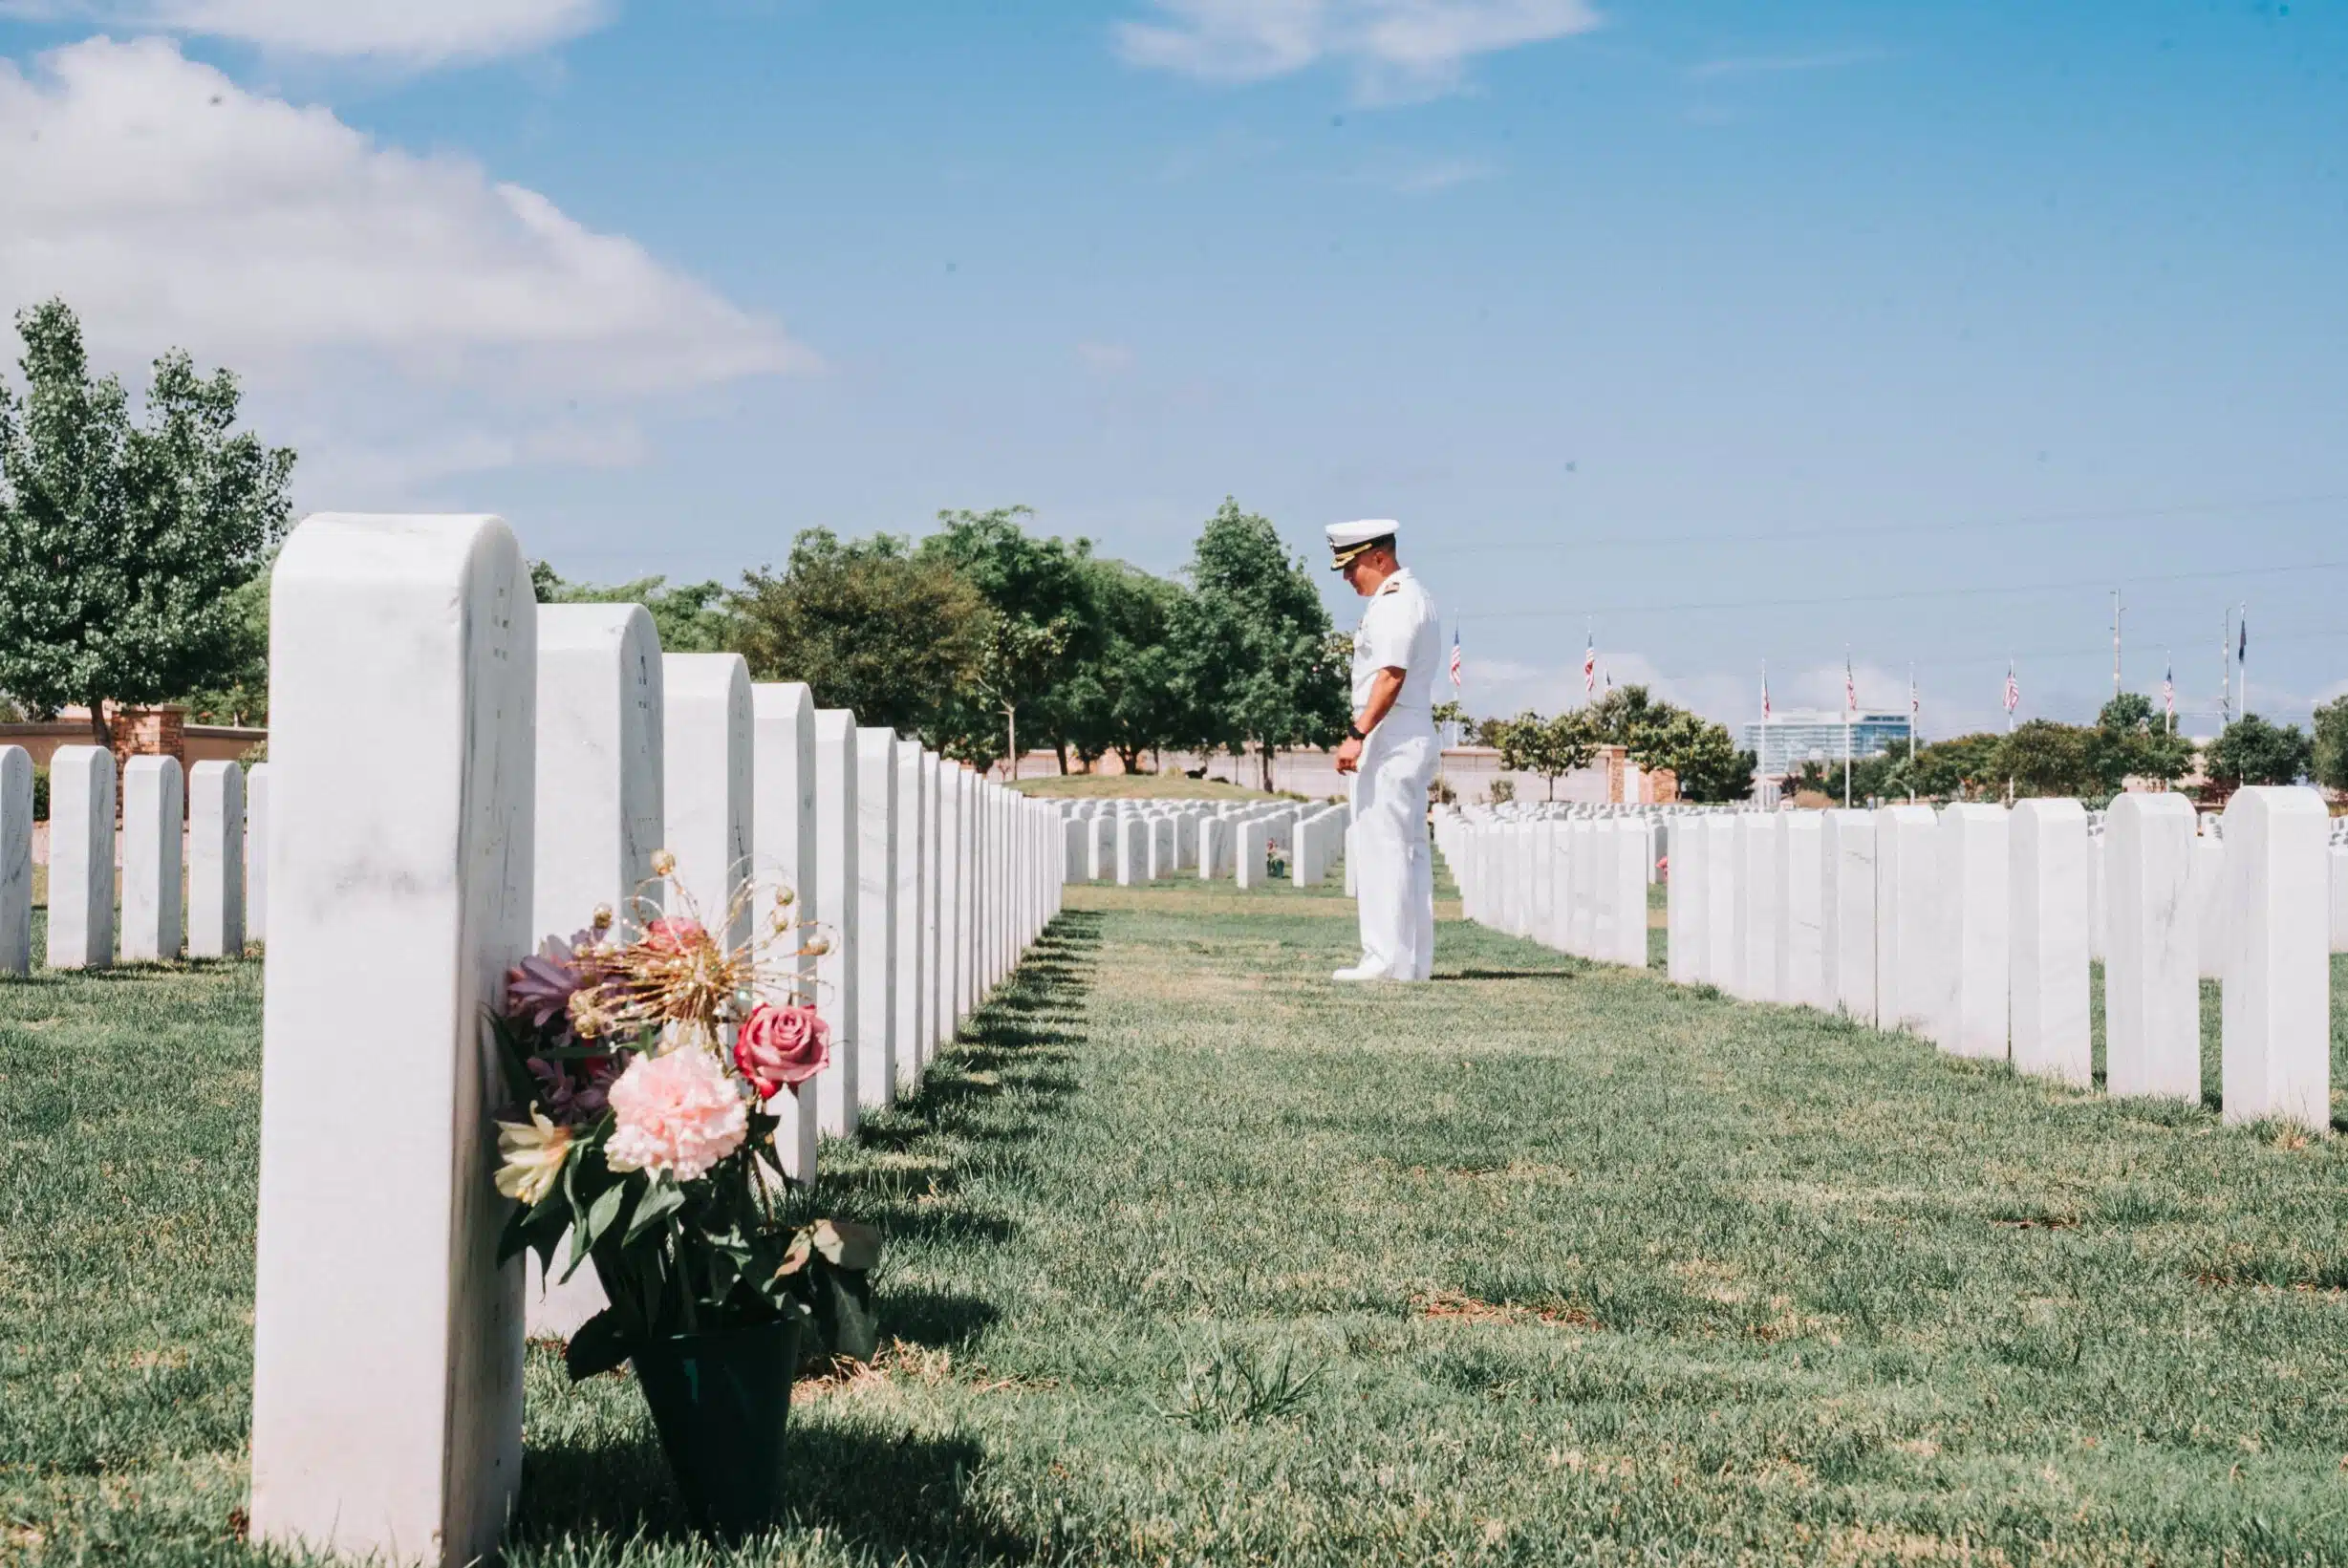 Memorial Day: How Do We Best Honor Those Who Have Died?